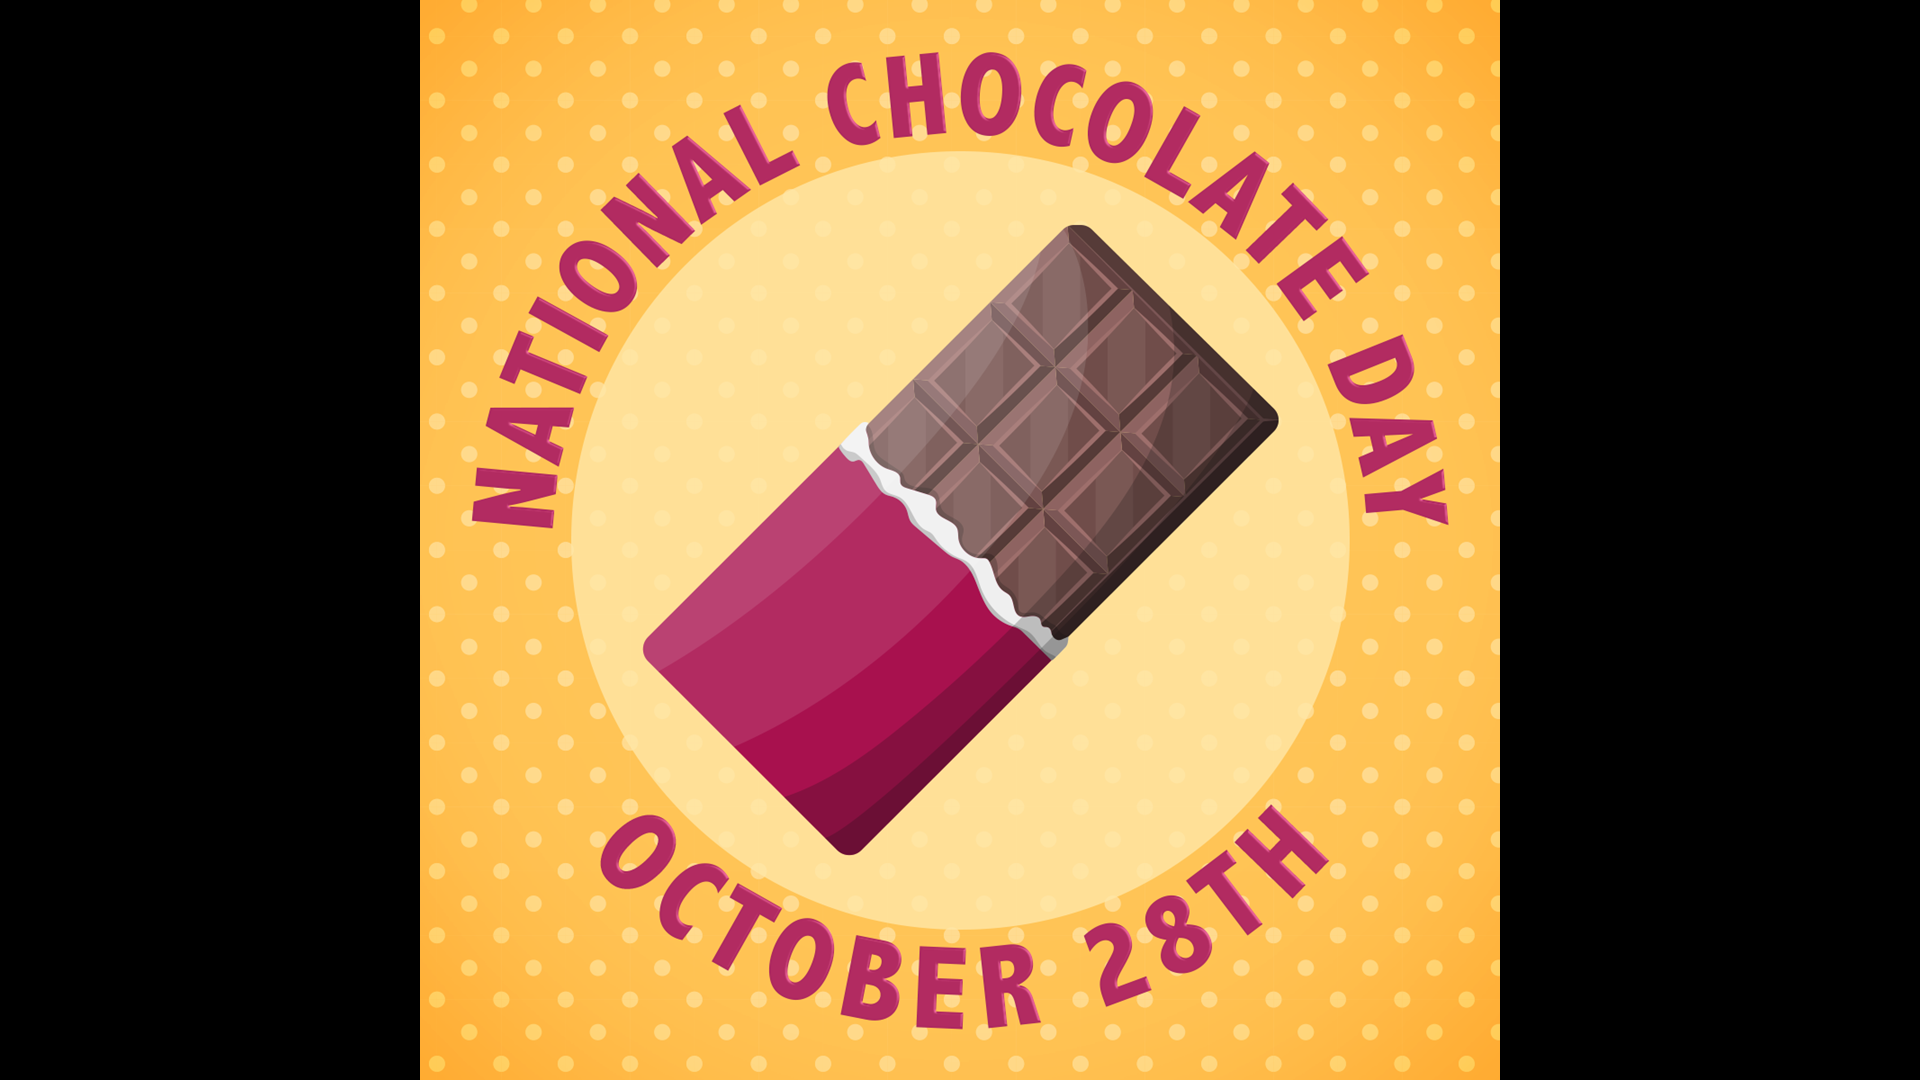 It’s National Chocolate Day! Here are some facts on the tasty treat